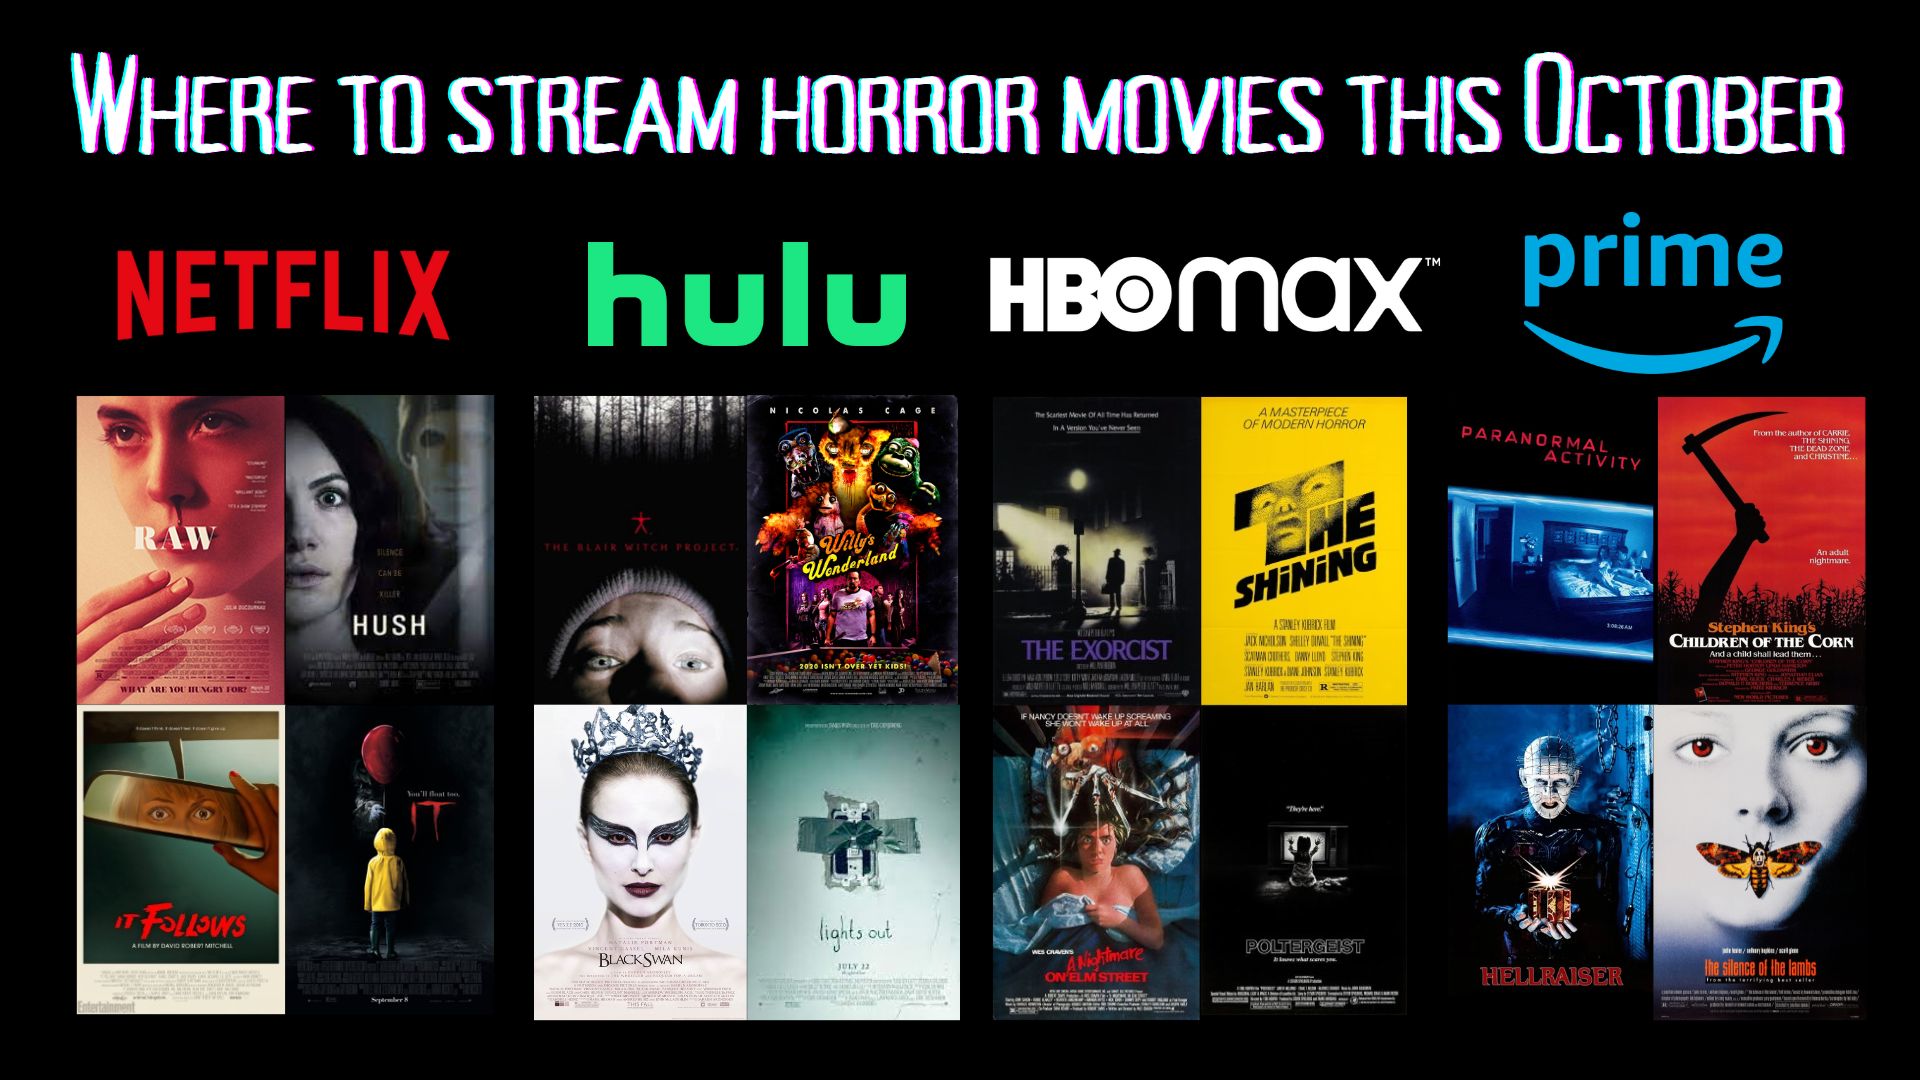 Where to stream horror movies this October